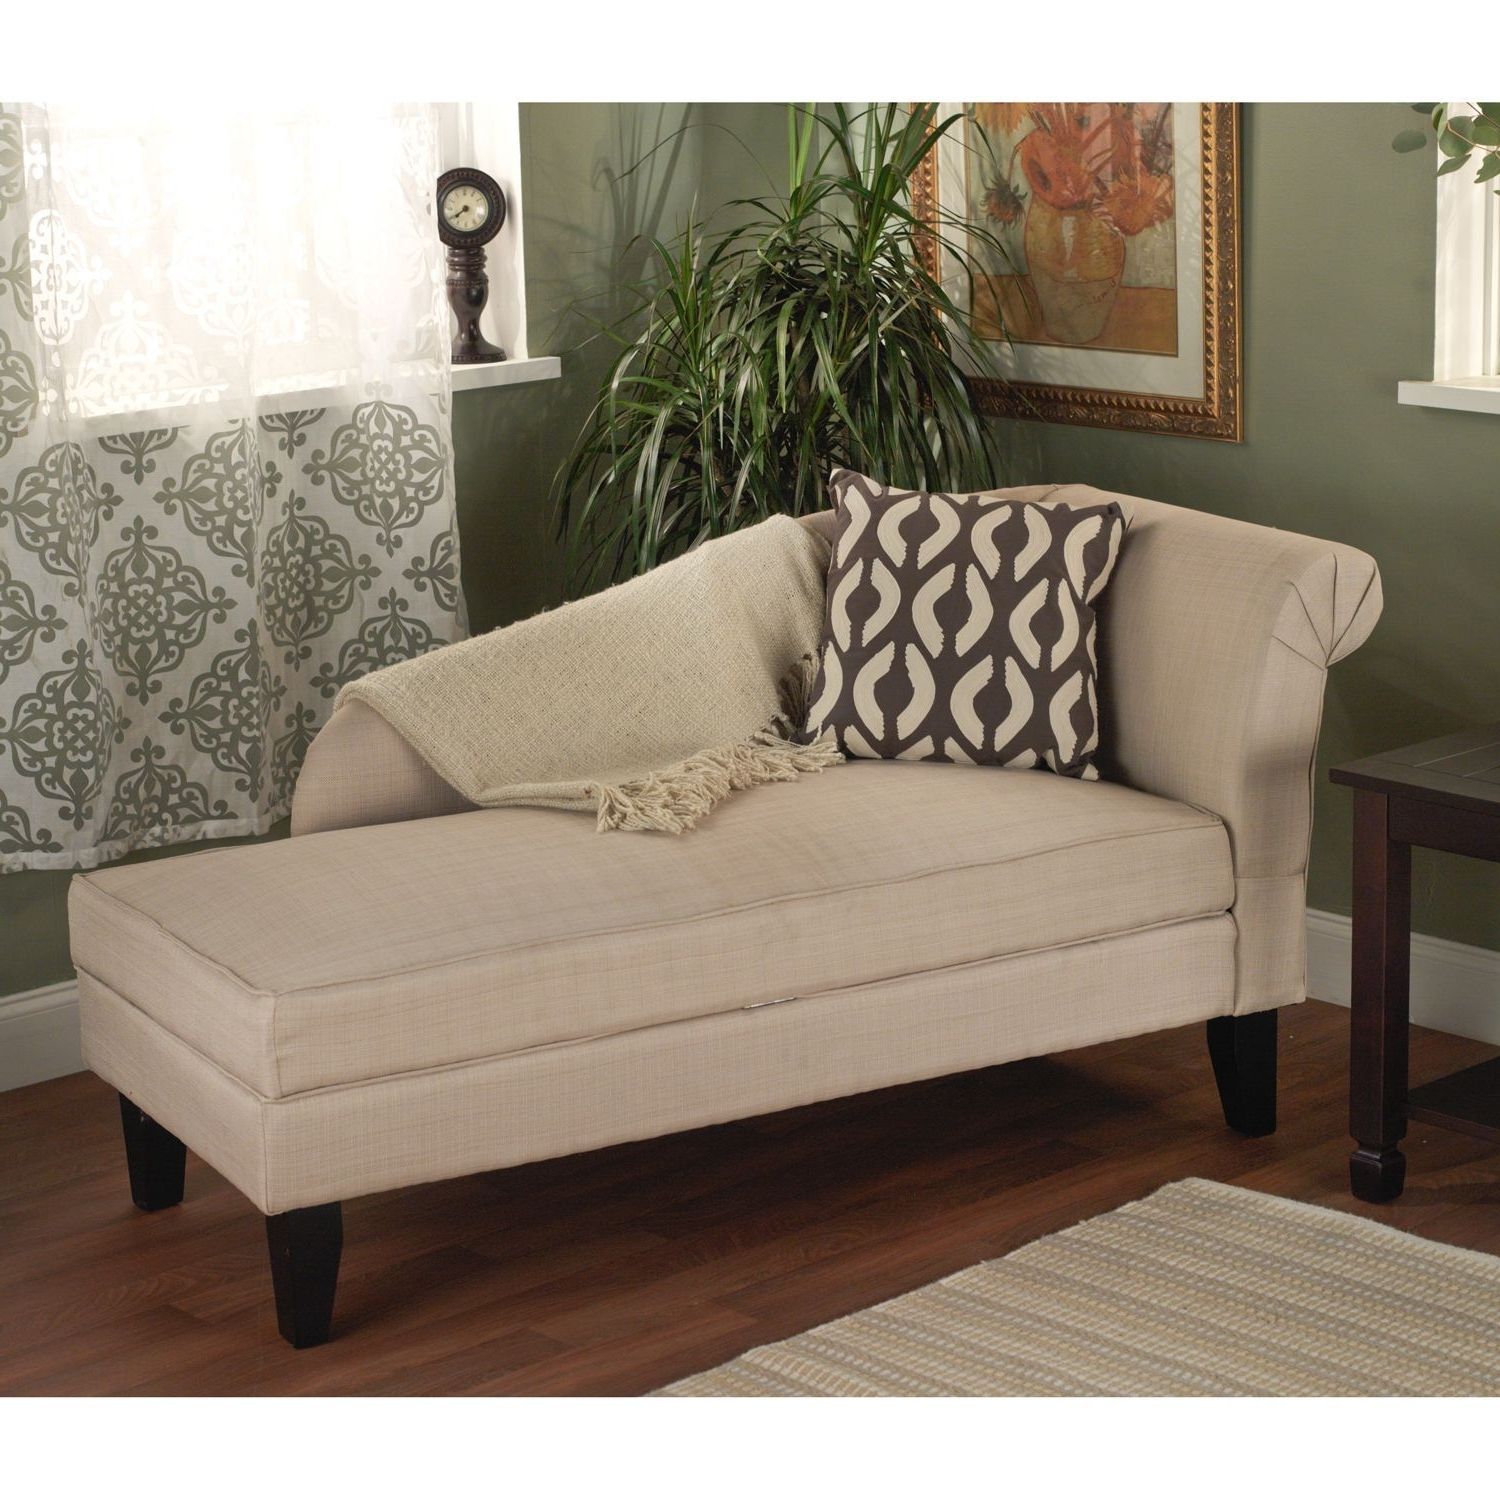 Most Recently Released Target Marketing Systems,leena Storage Chaise Lounger  Beige Within Chaises With Storage (View 1 of 15)